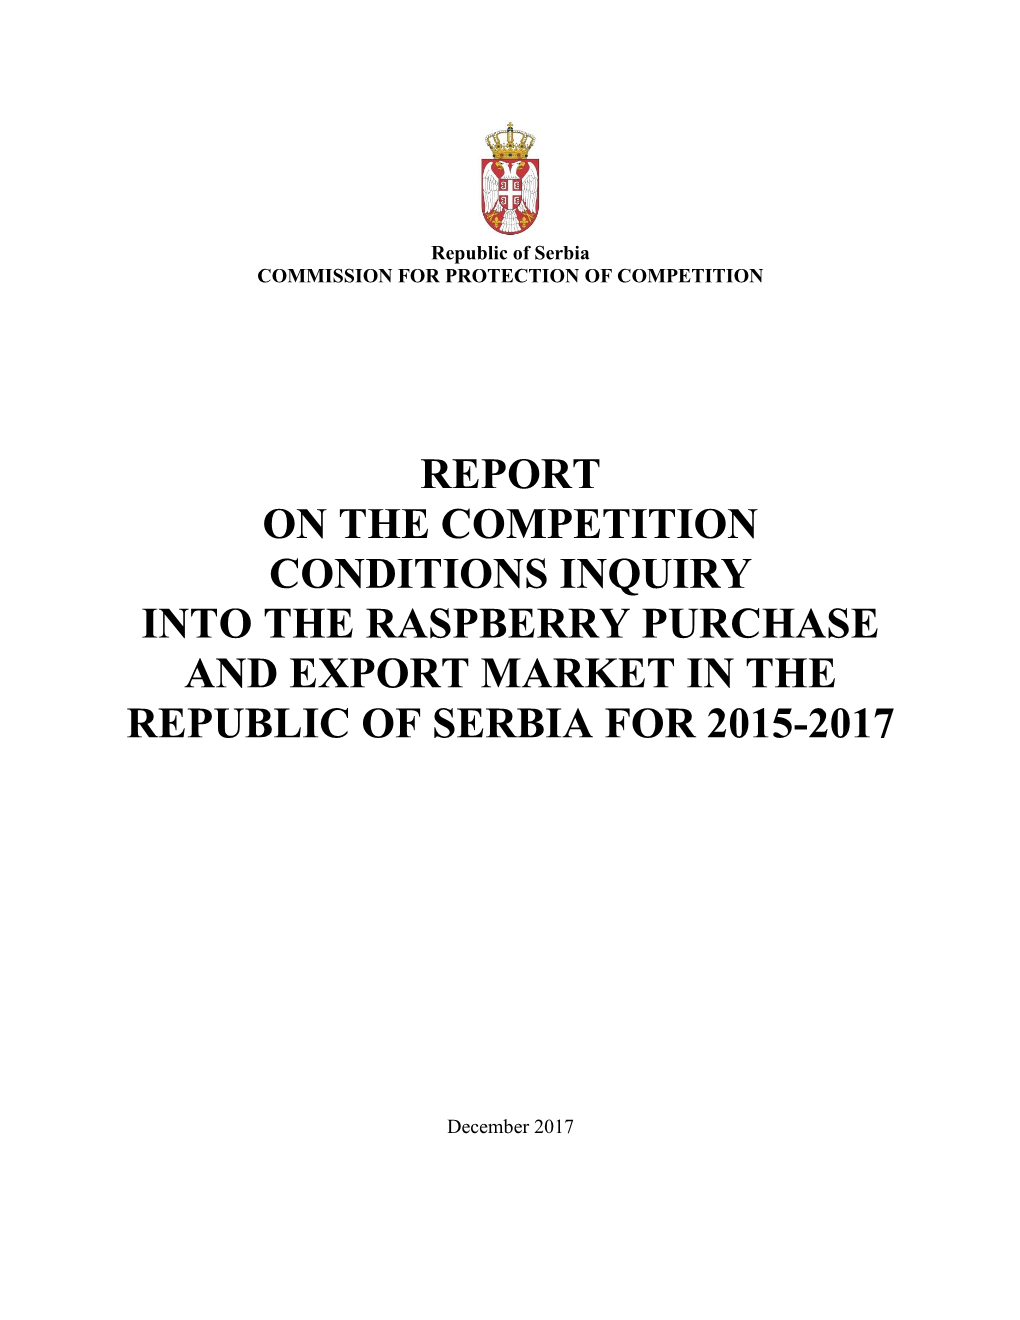 Report on the Competition Conditions Inquiry Into the Raspberry Purchase and Export Market in the Republic of Serbia for 2015-2017